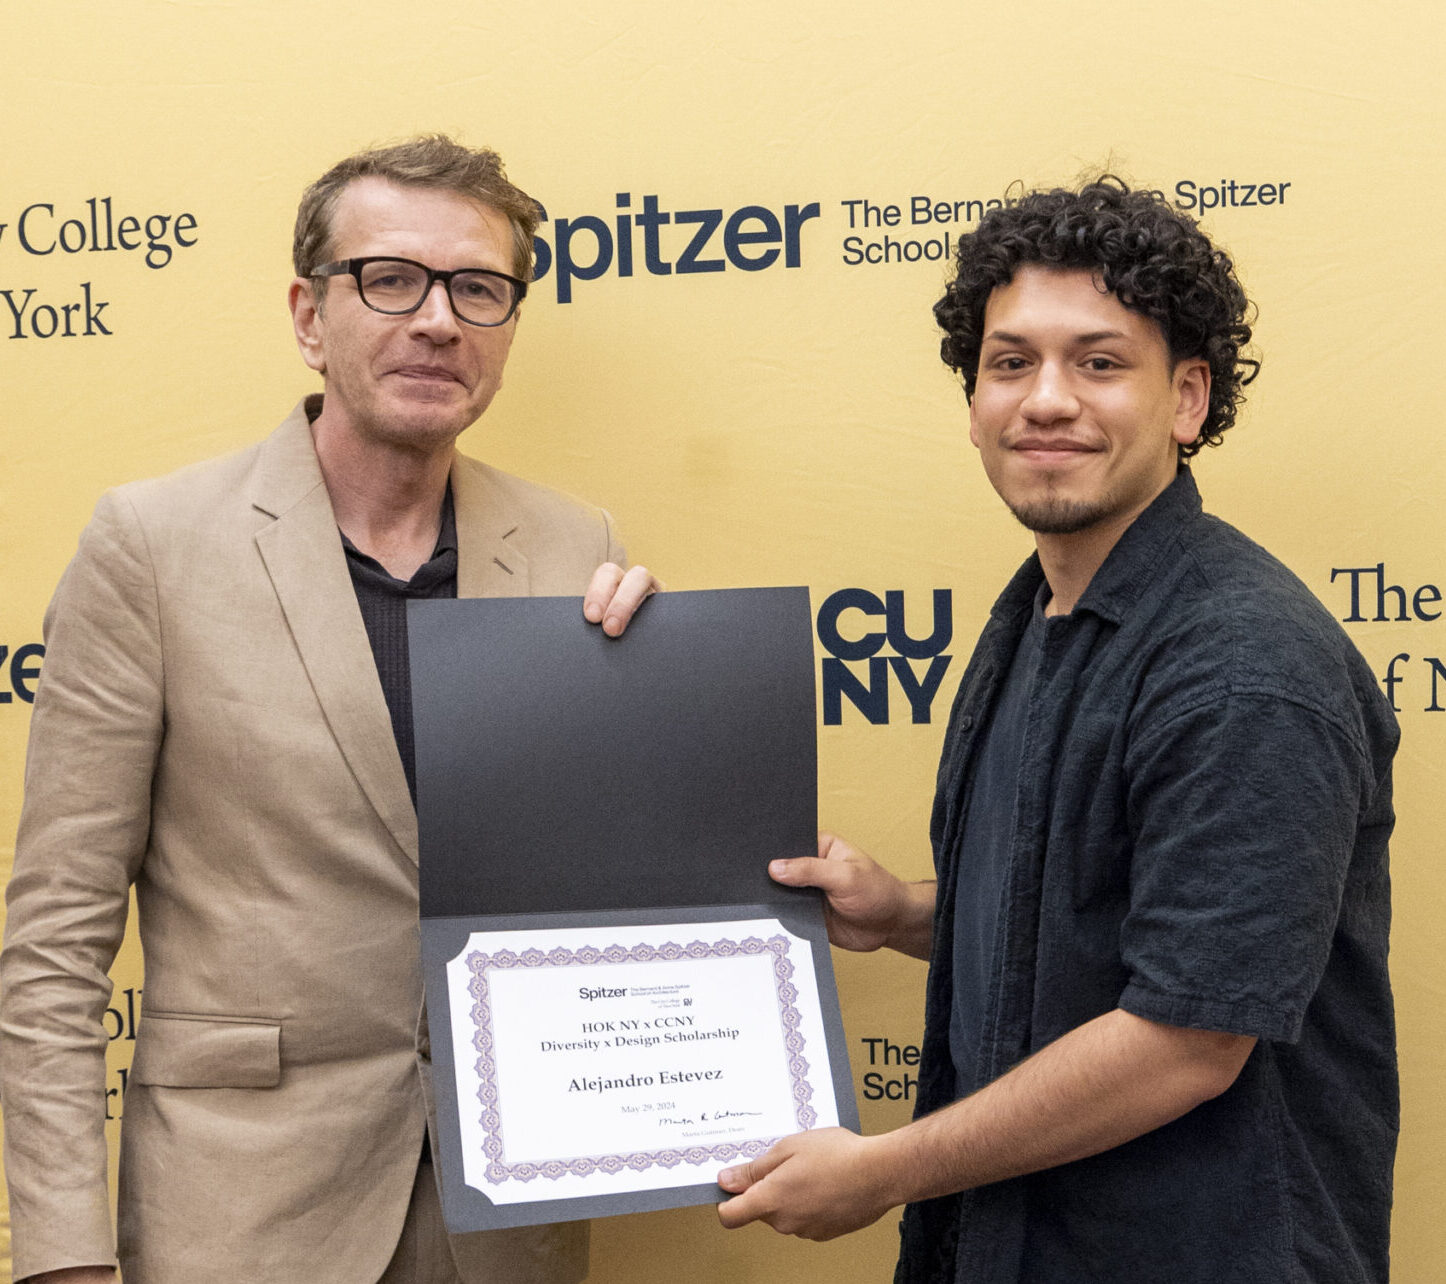 Faculty member and student standing and both holding an awards certificate in front of the Spitzer School step-and-repeat.